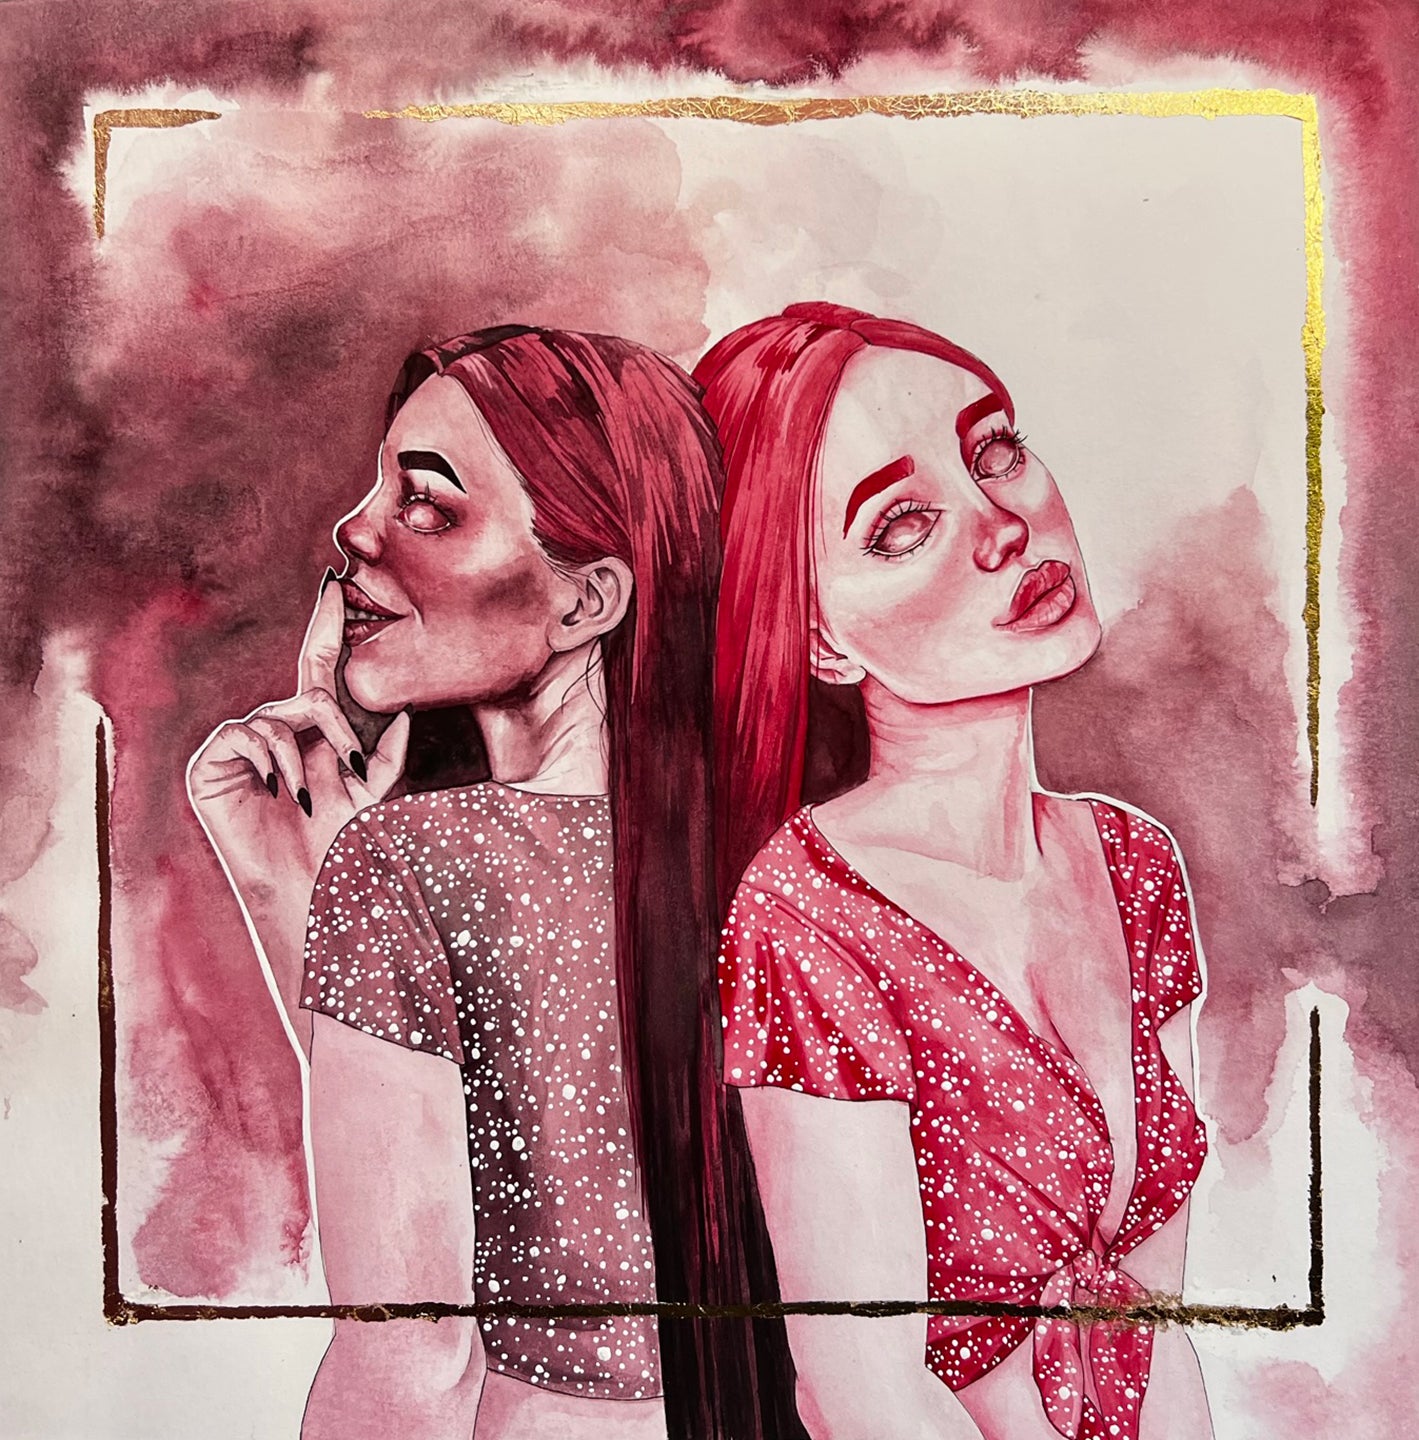 Monochrome red watercolor painting depicting the concept of being Two-Faced. Features one woman painted twice back to back, one is done in a light appealing shade of red and has a "nice" demeanor, the other is painted in a dark shade of red, she is making the "shhhh" motion wile smiling in a way that seems evil.